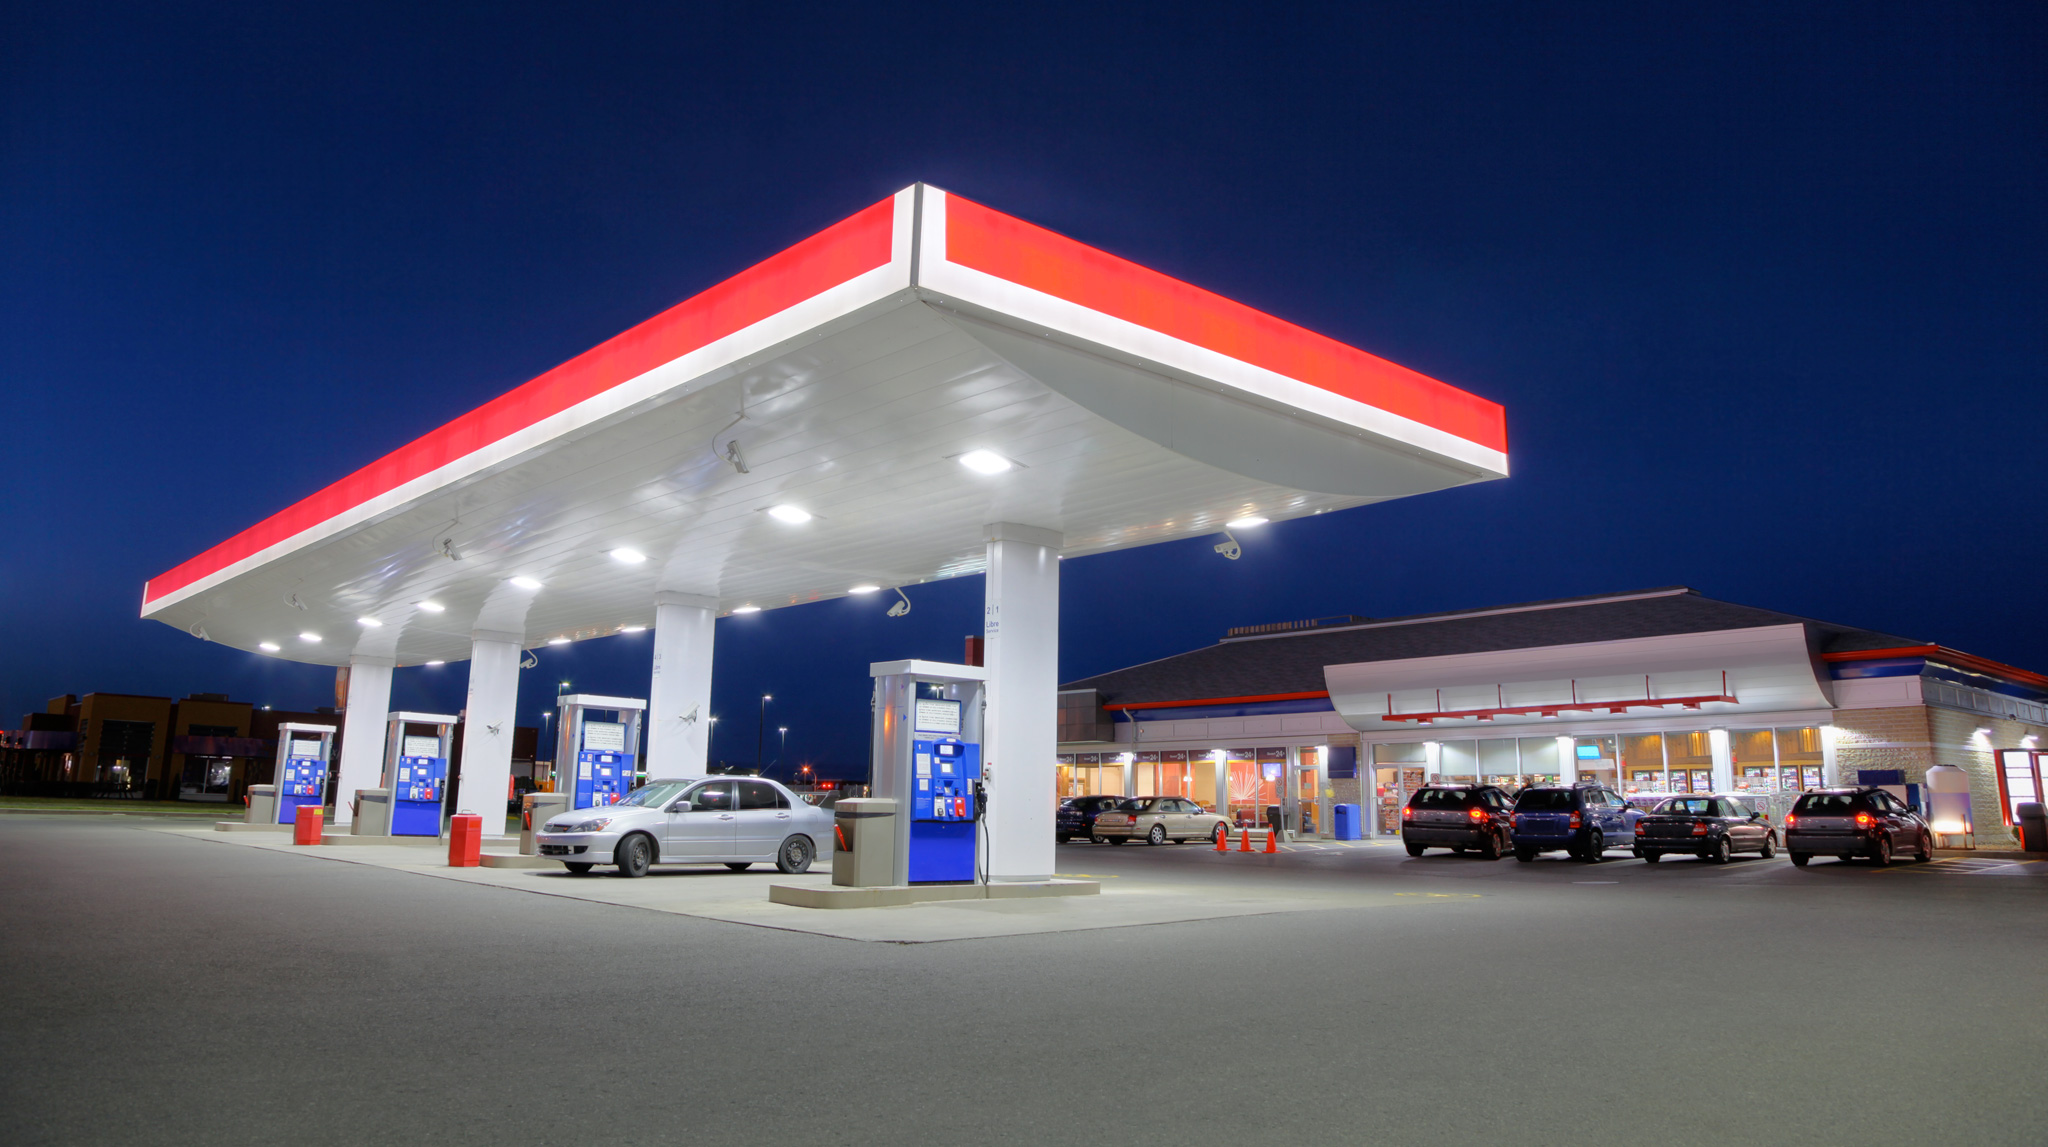 Key Facts on Ethanol Flex Fuels (E85)IF YOU OWN A SERVICE STATION AND YOU’RE LOOKING FOR A WAY TO DISTINGUISH YOURSELF FROM YOUR COMPETITION, YOU NEED TO LOOK AT E85